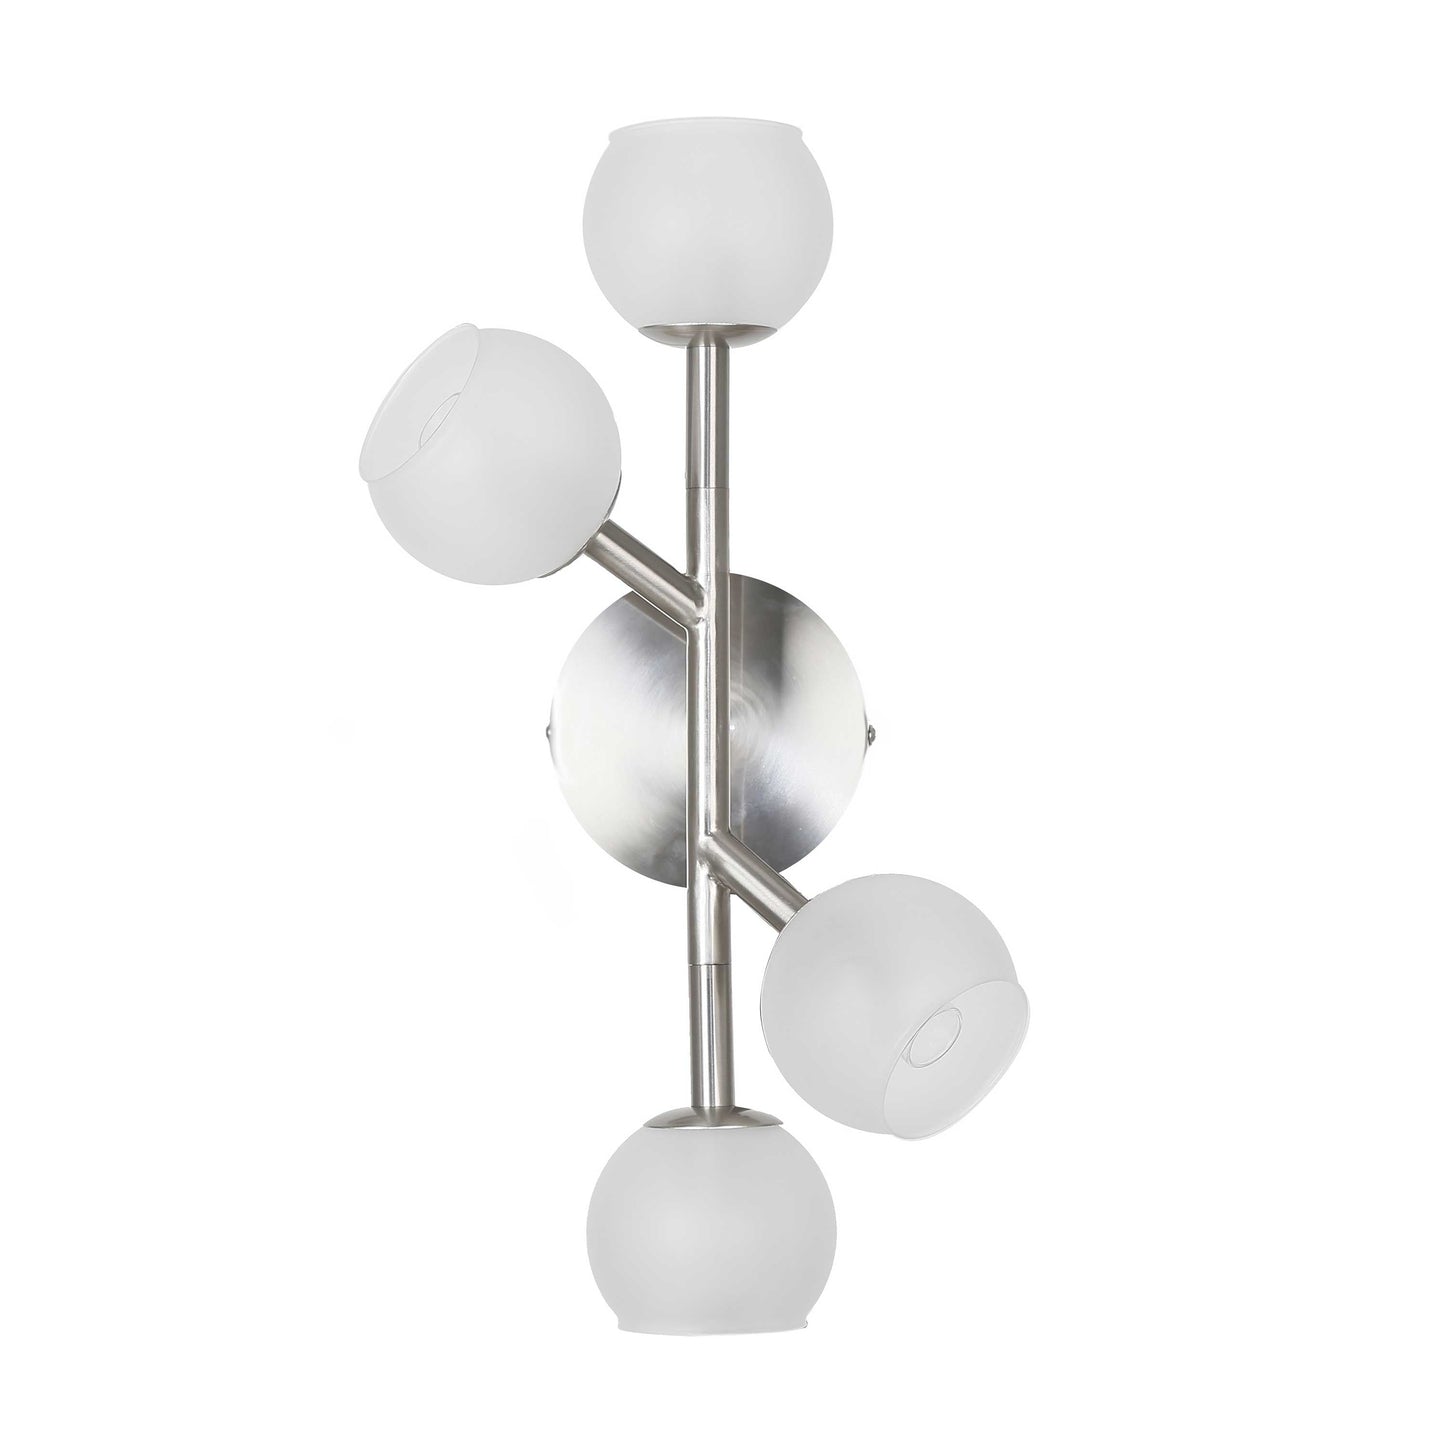 Dainolite 4 Light Halogen Wall Sconce Satin Chrome Finish with Frosted Glass